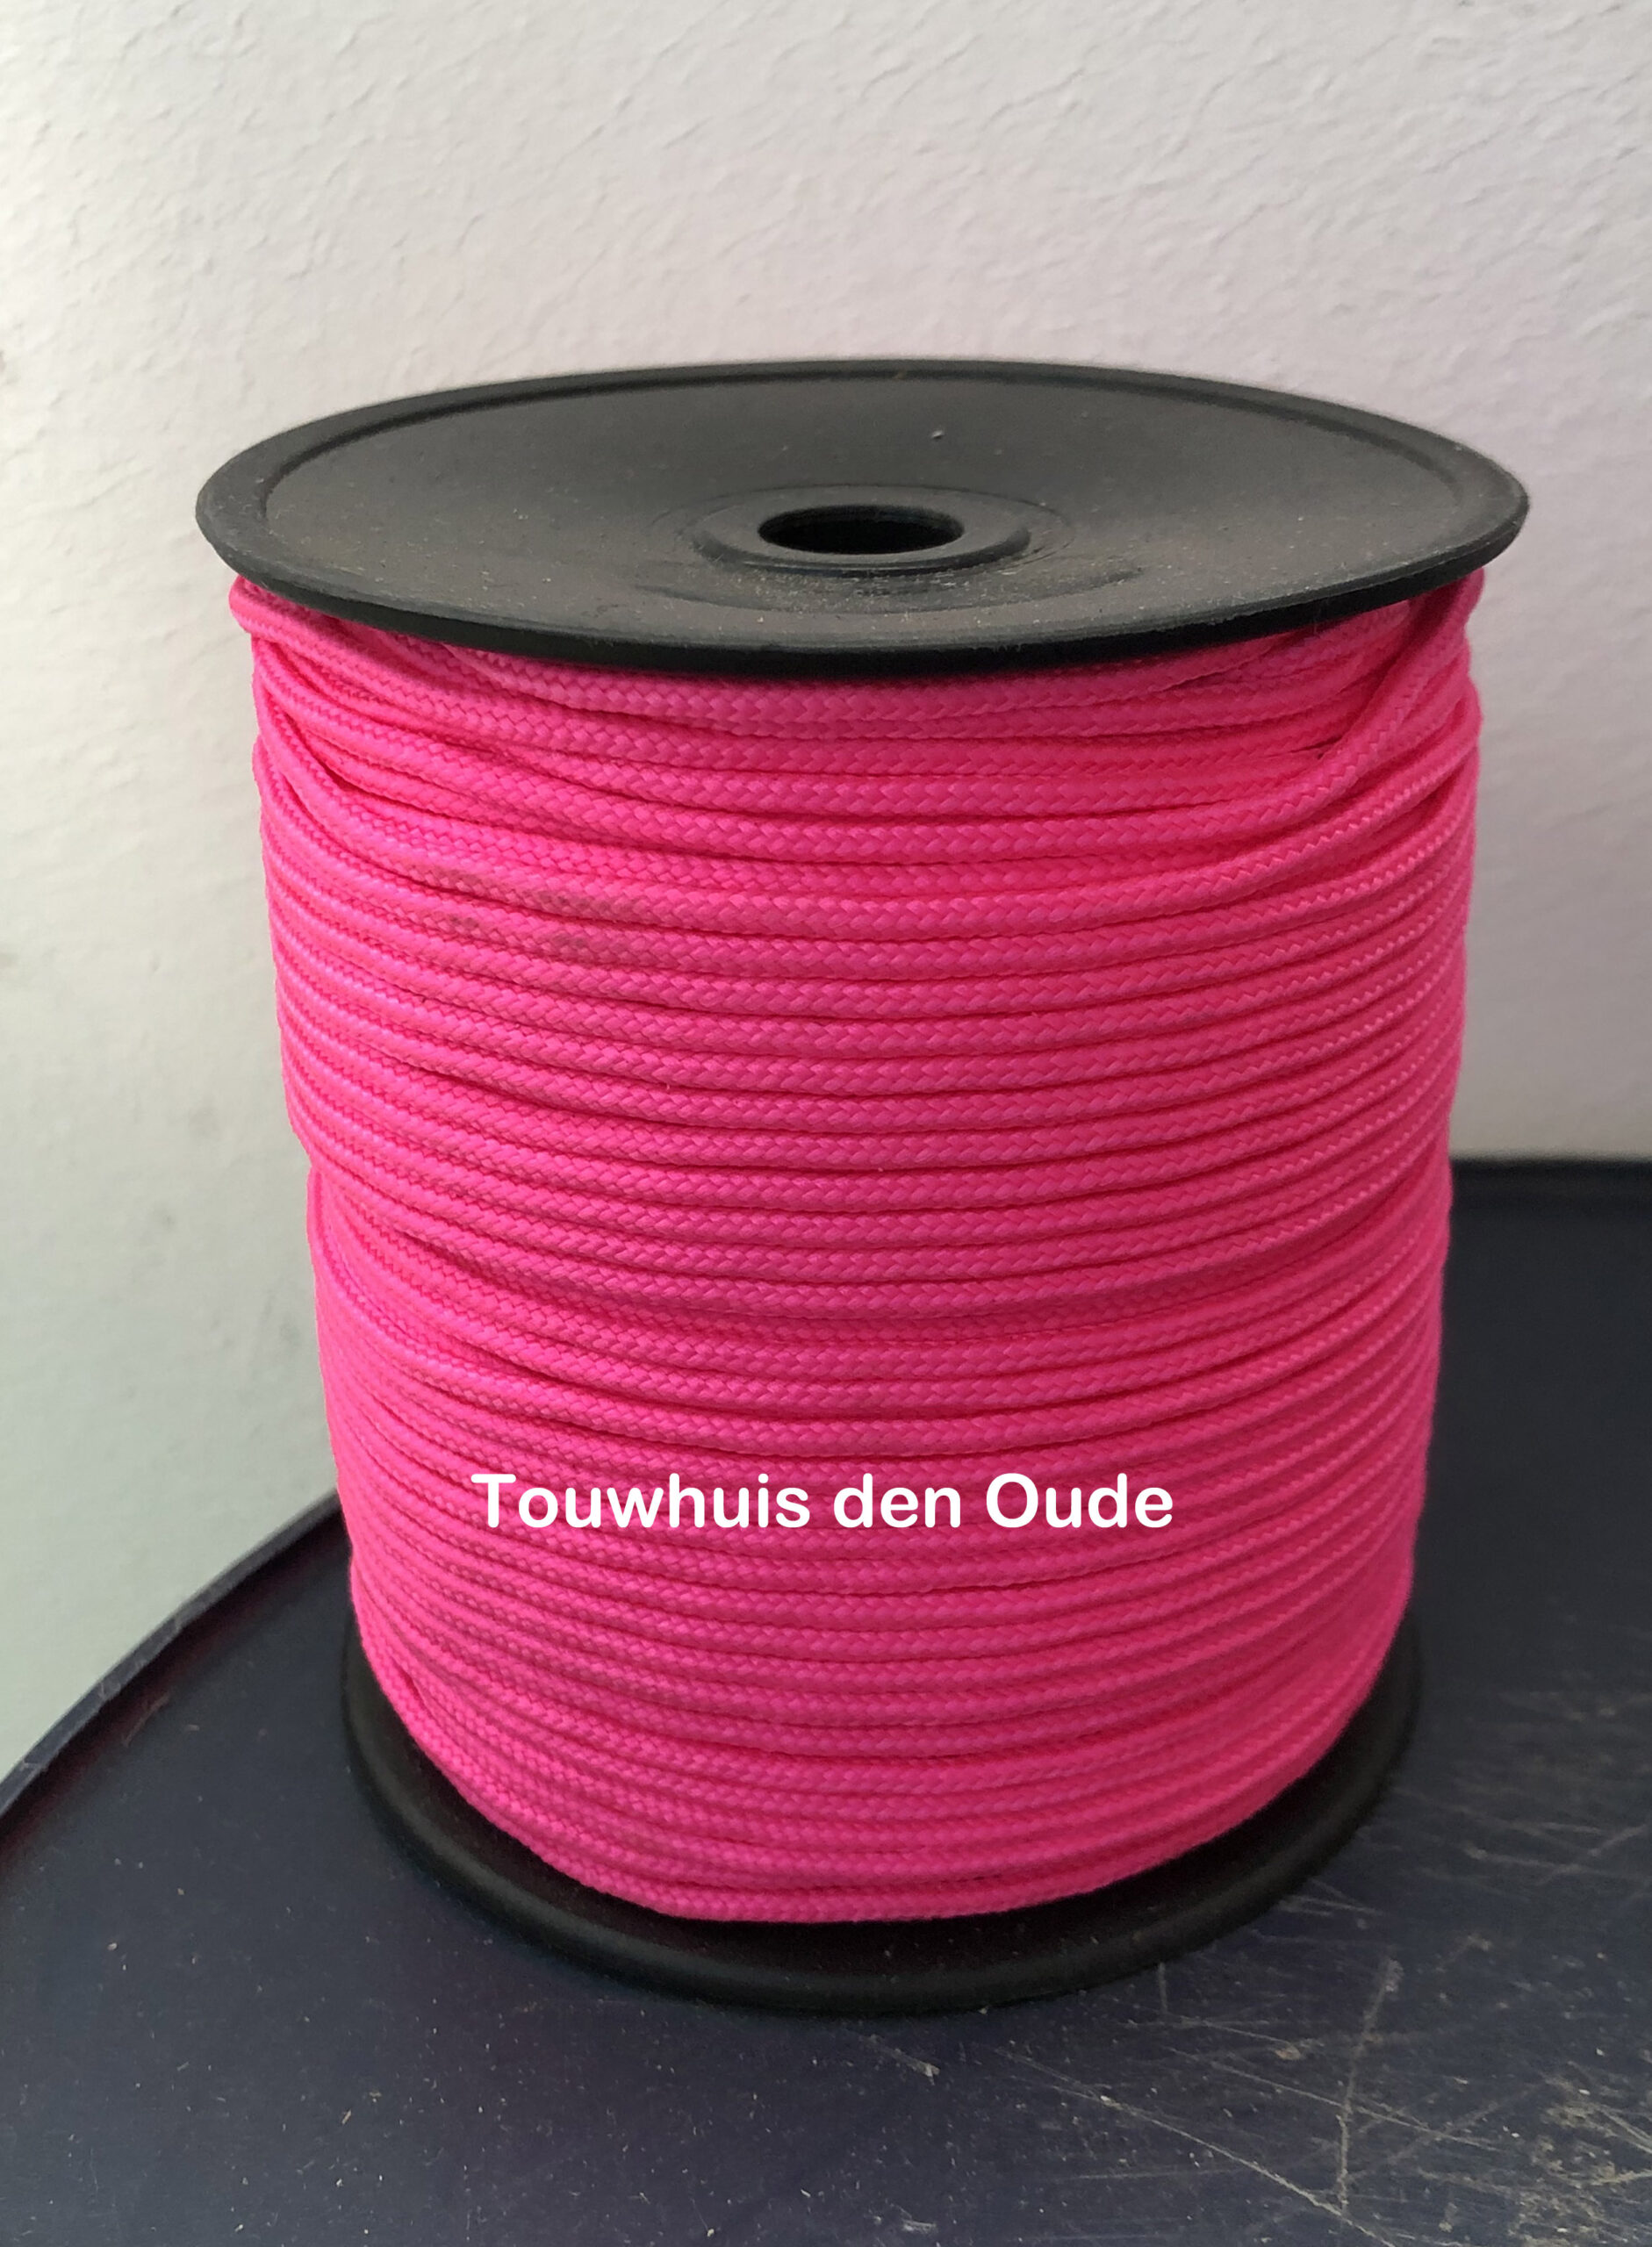 https://touwhuisdenoude.nl/wp-content/uploads/2021/03/paracord-roze-scaled.jpg